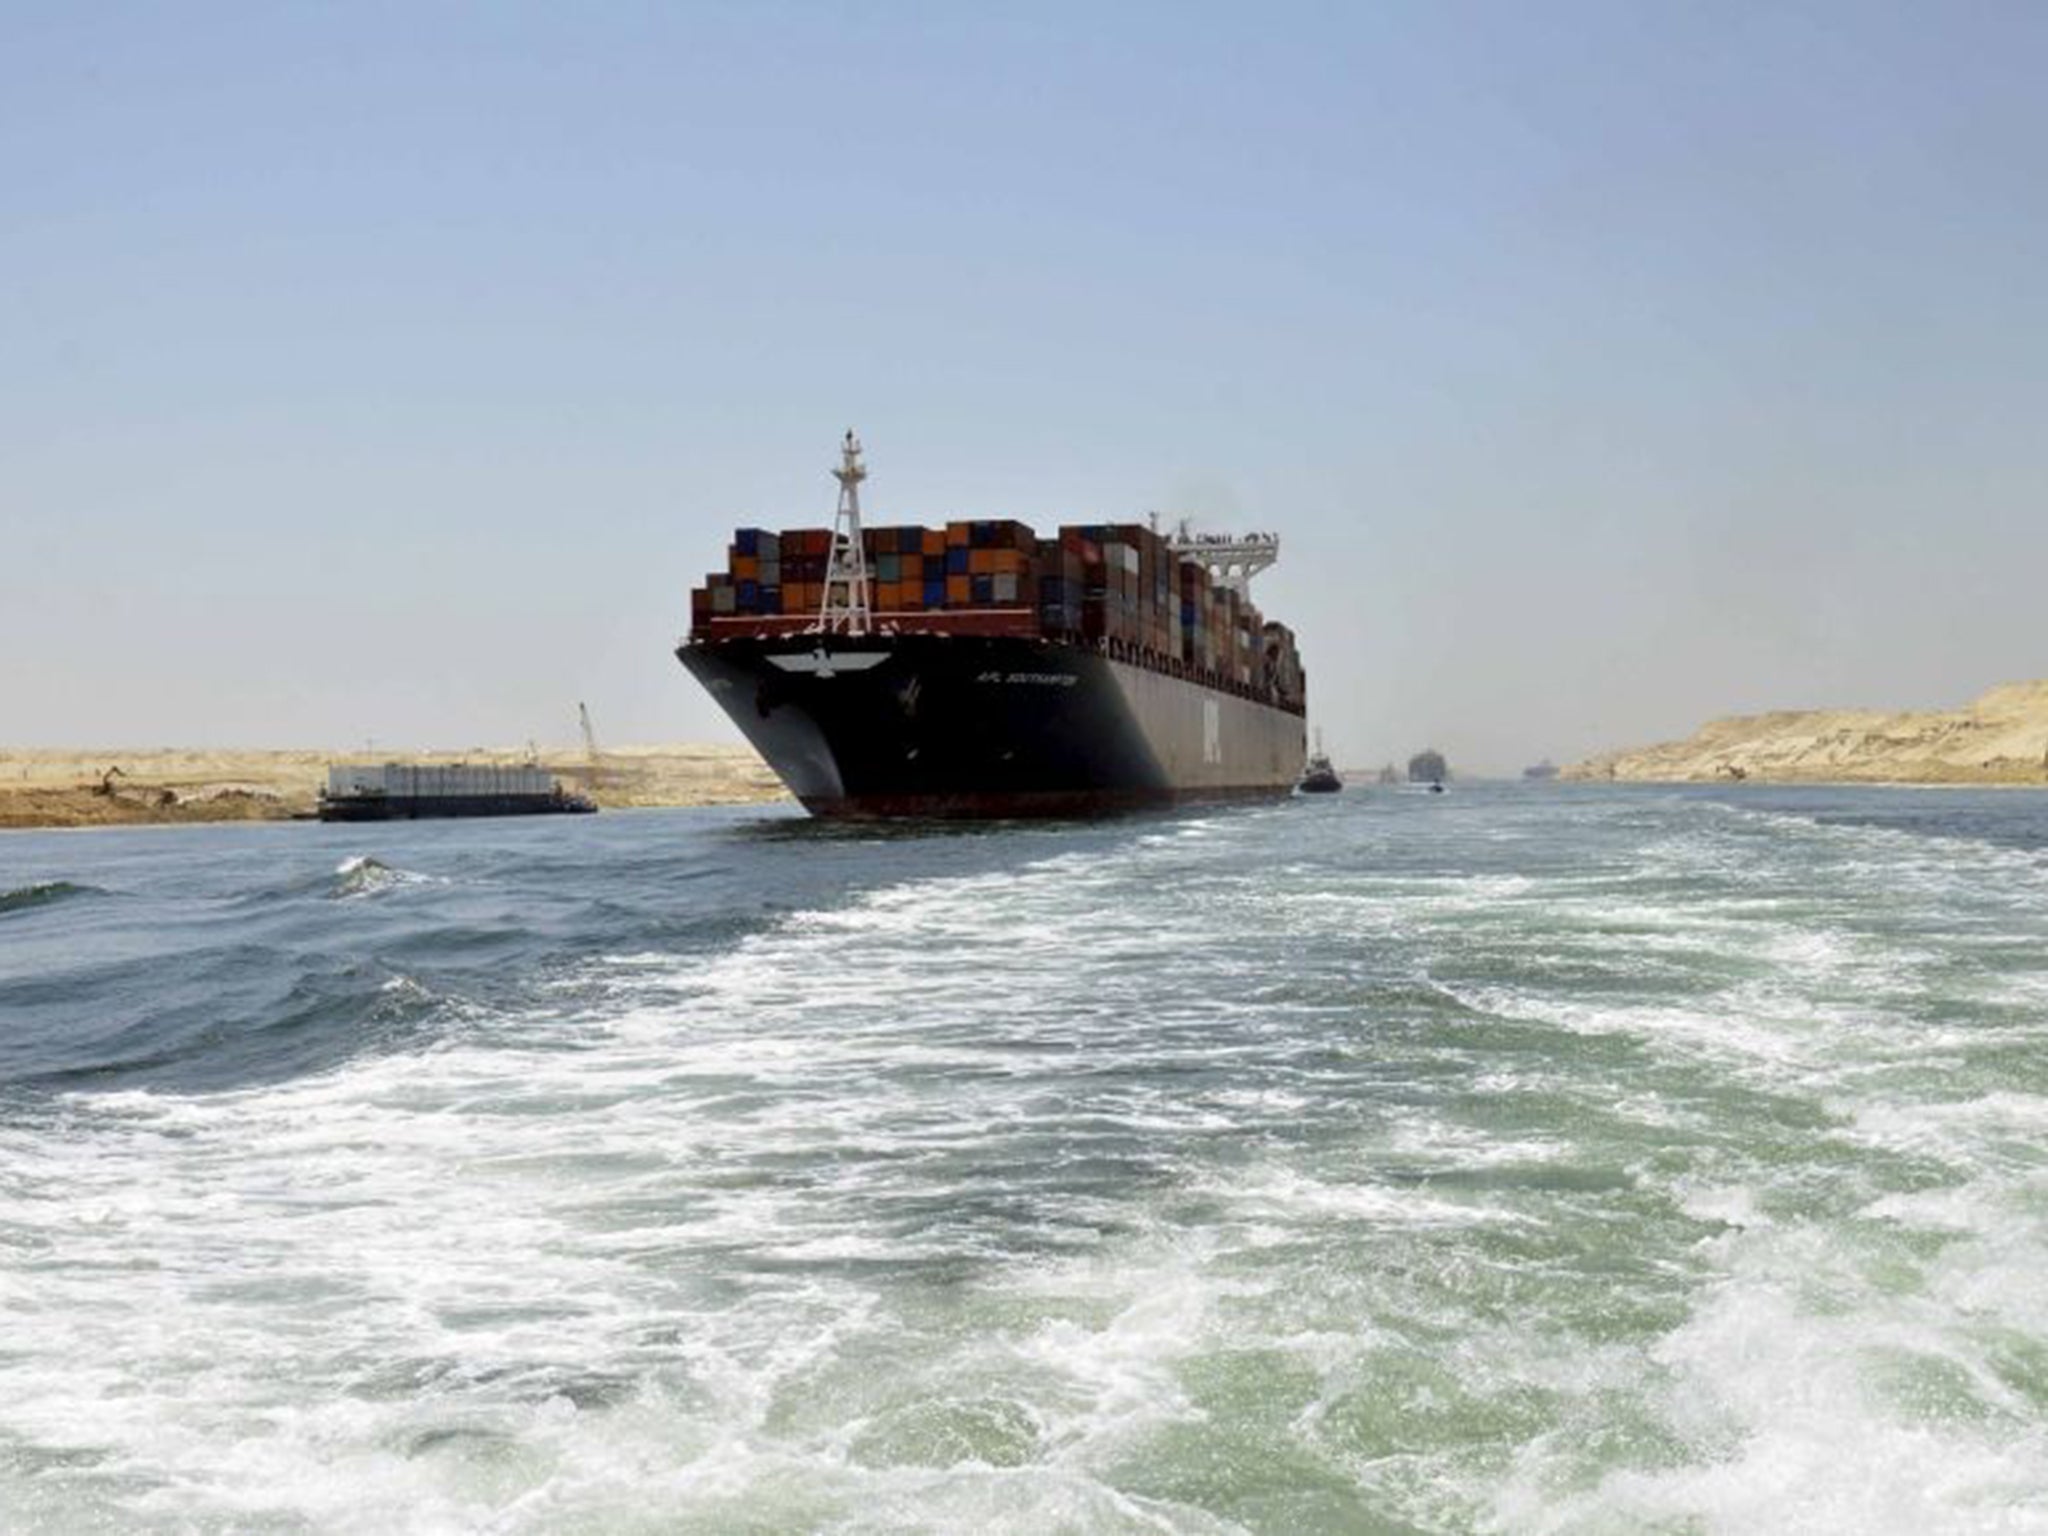 A container ship in the new Suez Canal, due to be officially opened this week